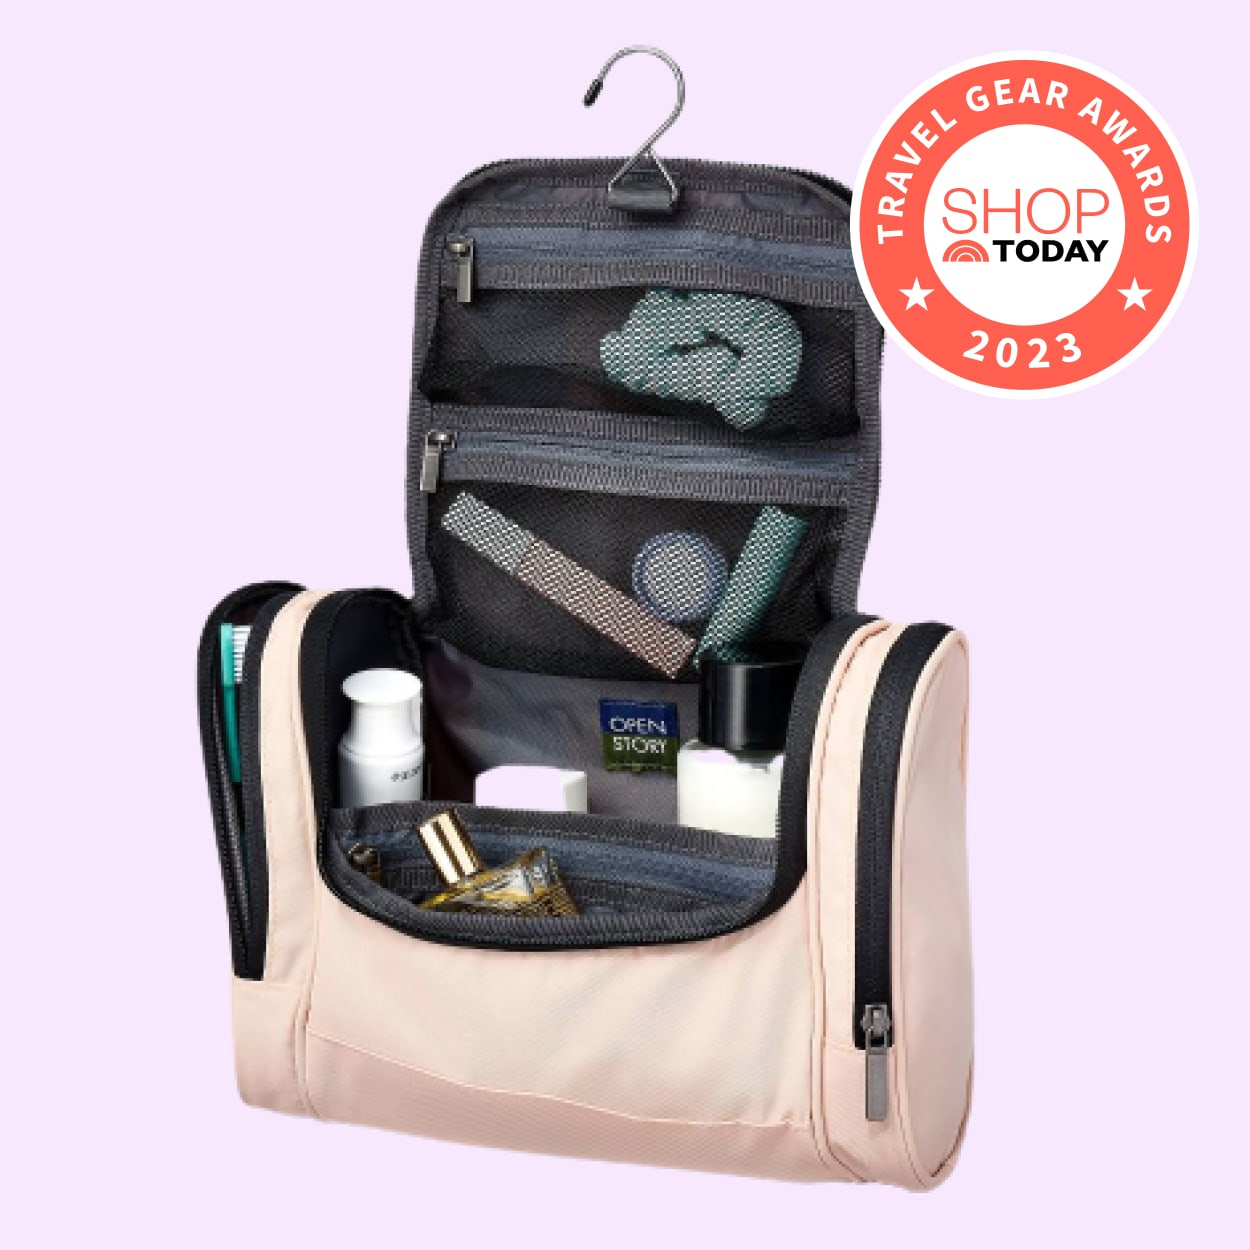 5 best packing accessories of 2023: Shop TODAY Travel Gear Awards